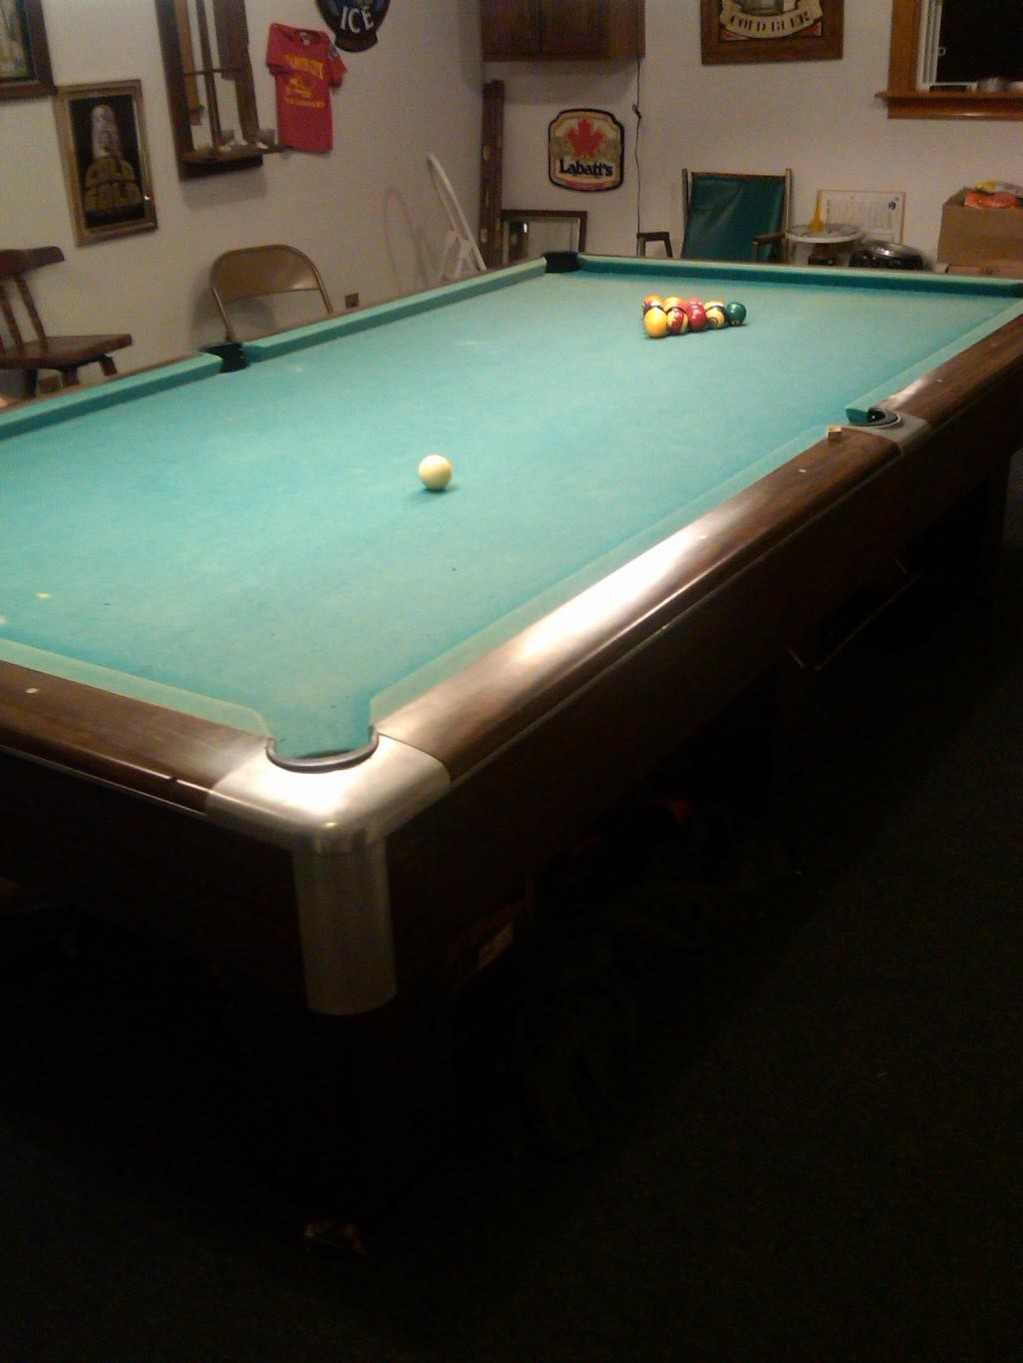 Luther Wimpy Lassiters personal 5 x 10 pool table, which apparently still has the old worsted wool cloth and billiard balls that Lassiter played with.